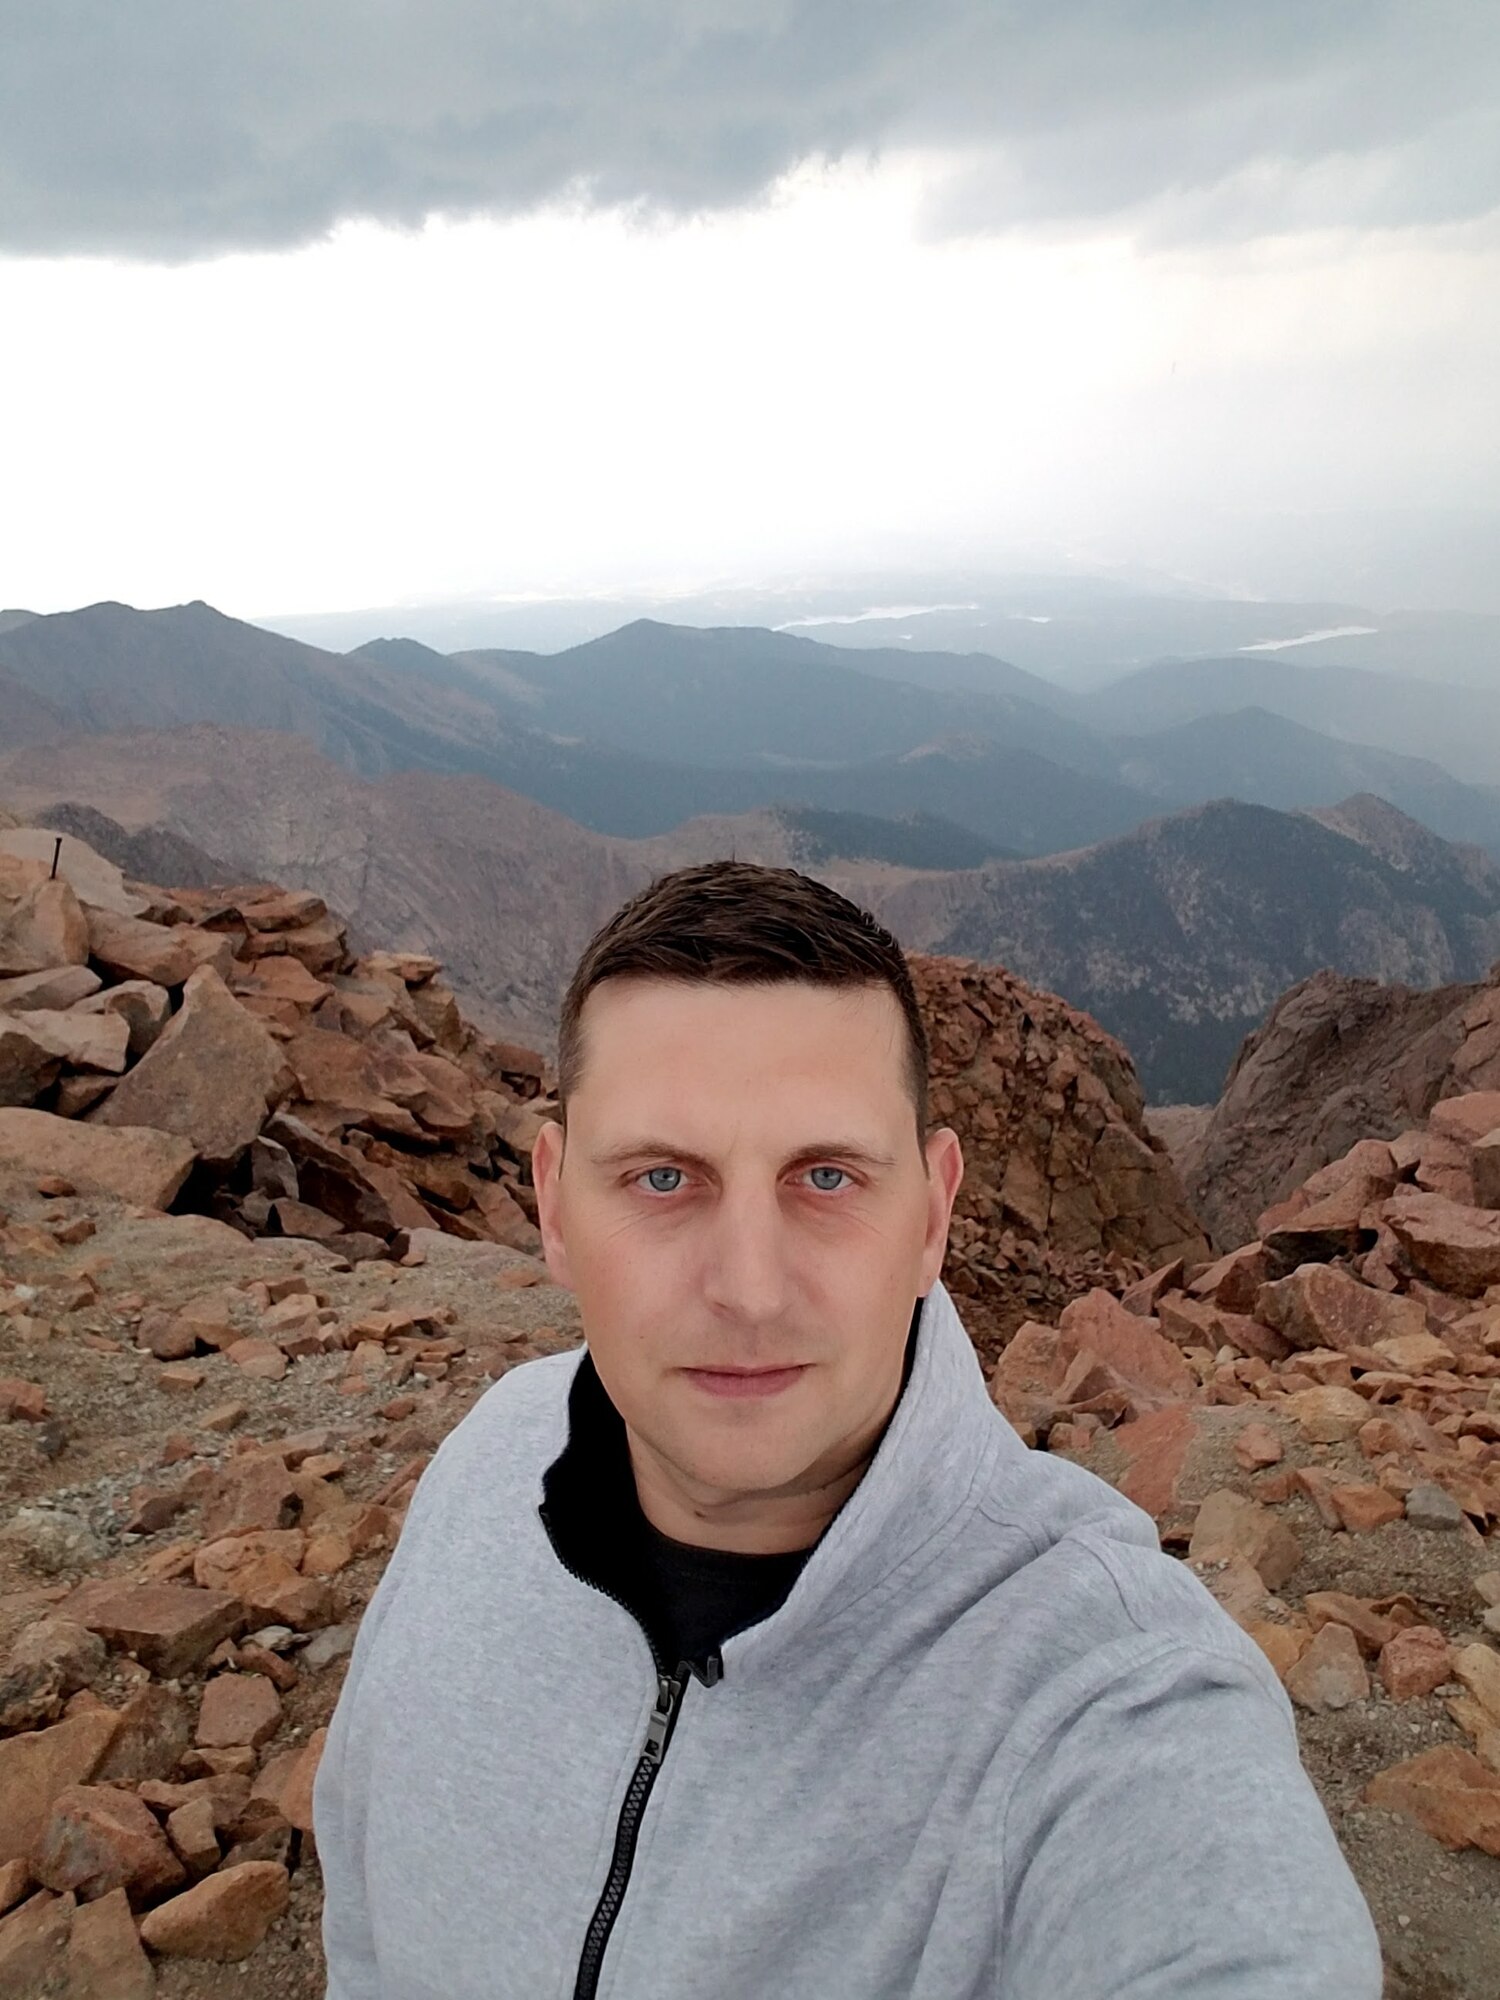 Master Sgt. Andrew Davis takes time to enjoy his hobby of hiking at Pikes Peak in Colorado, 2019.